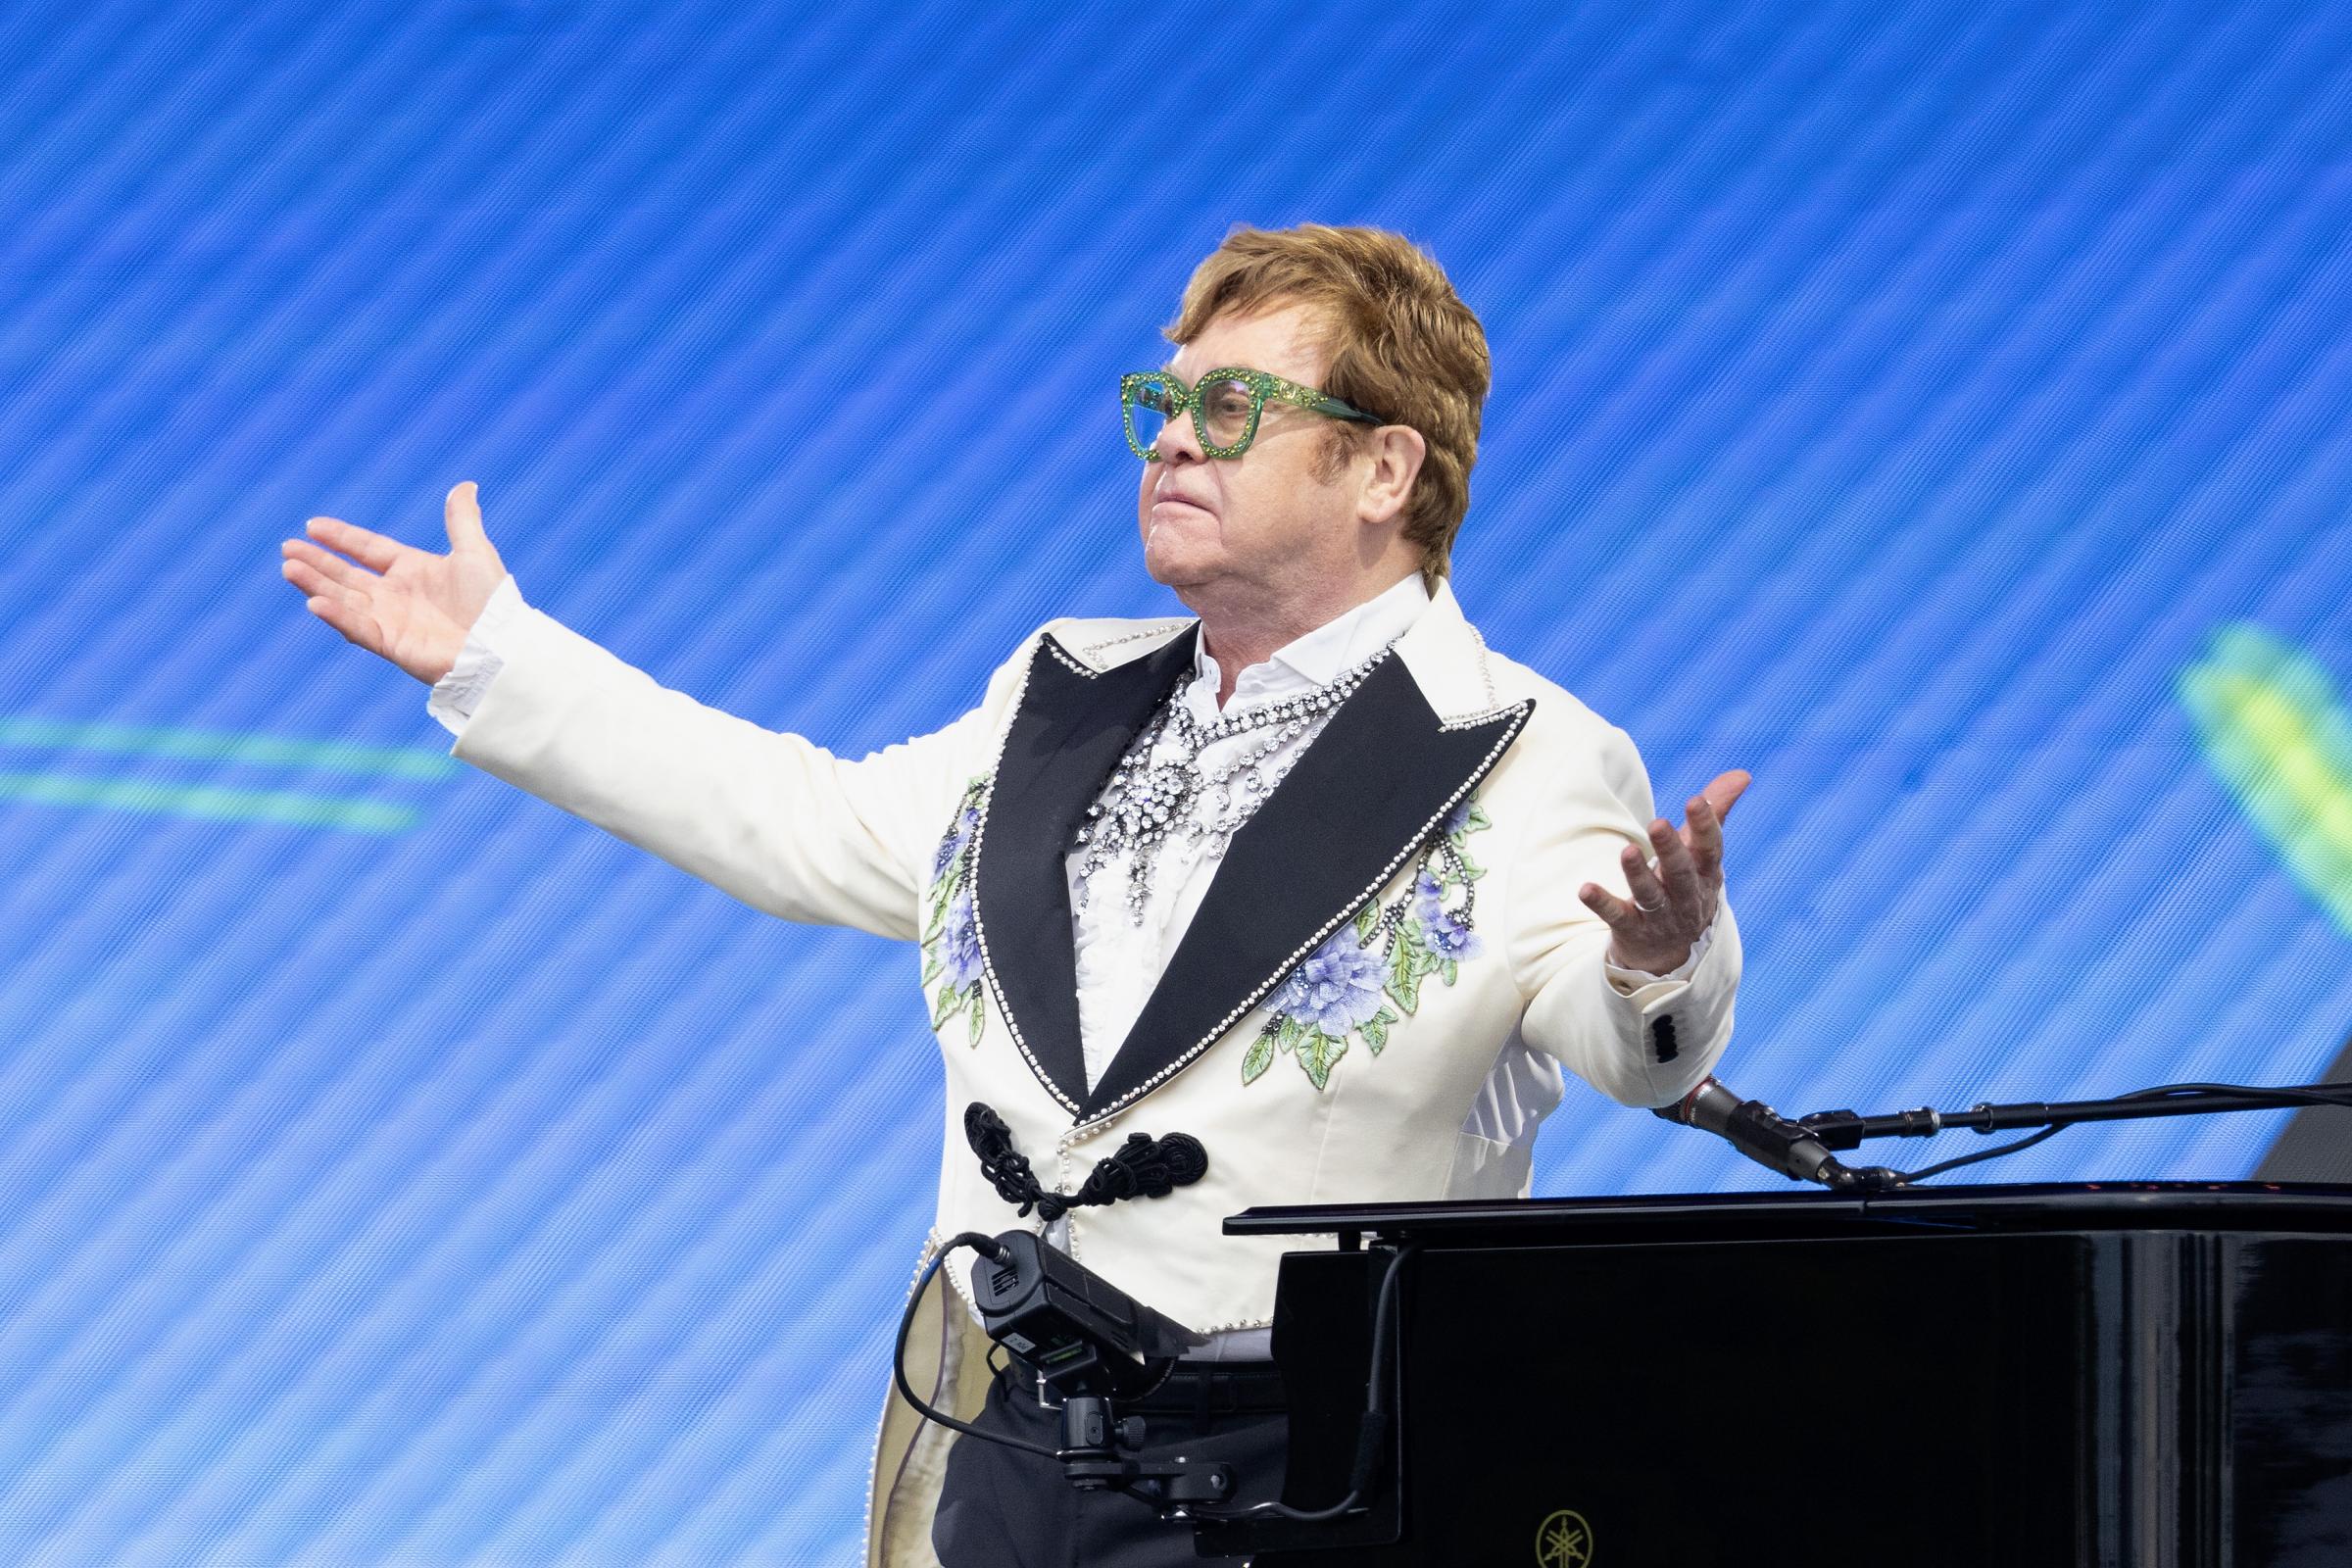 Extra tickets on sale for Elton John's Watford concerts 